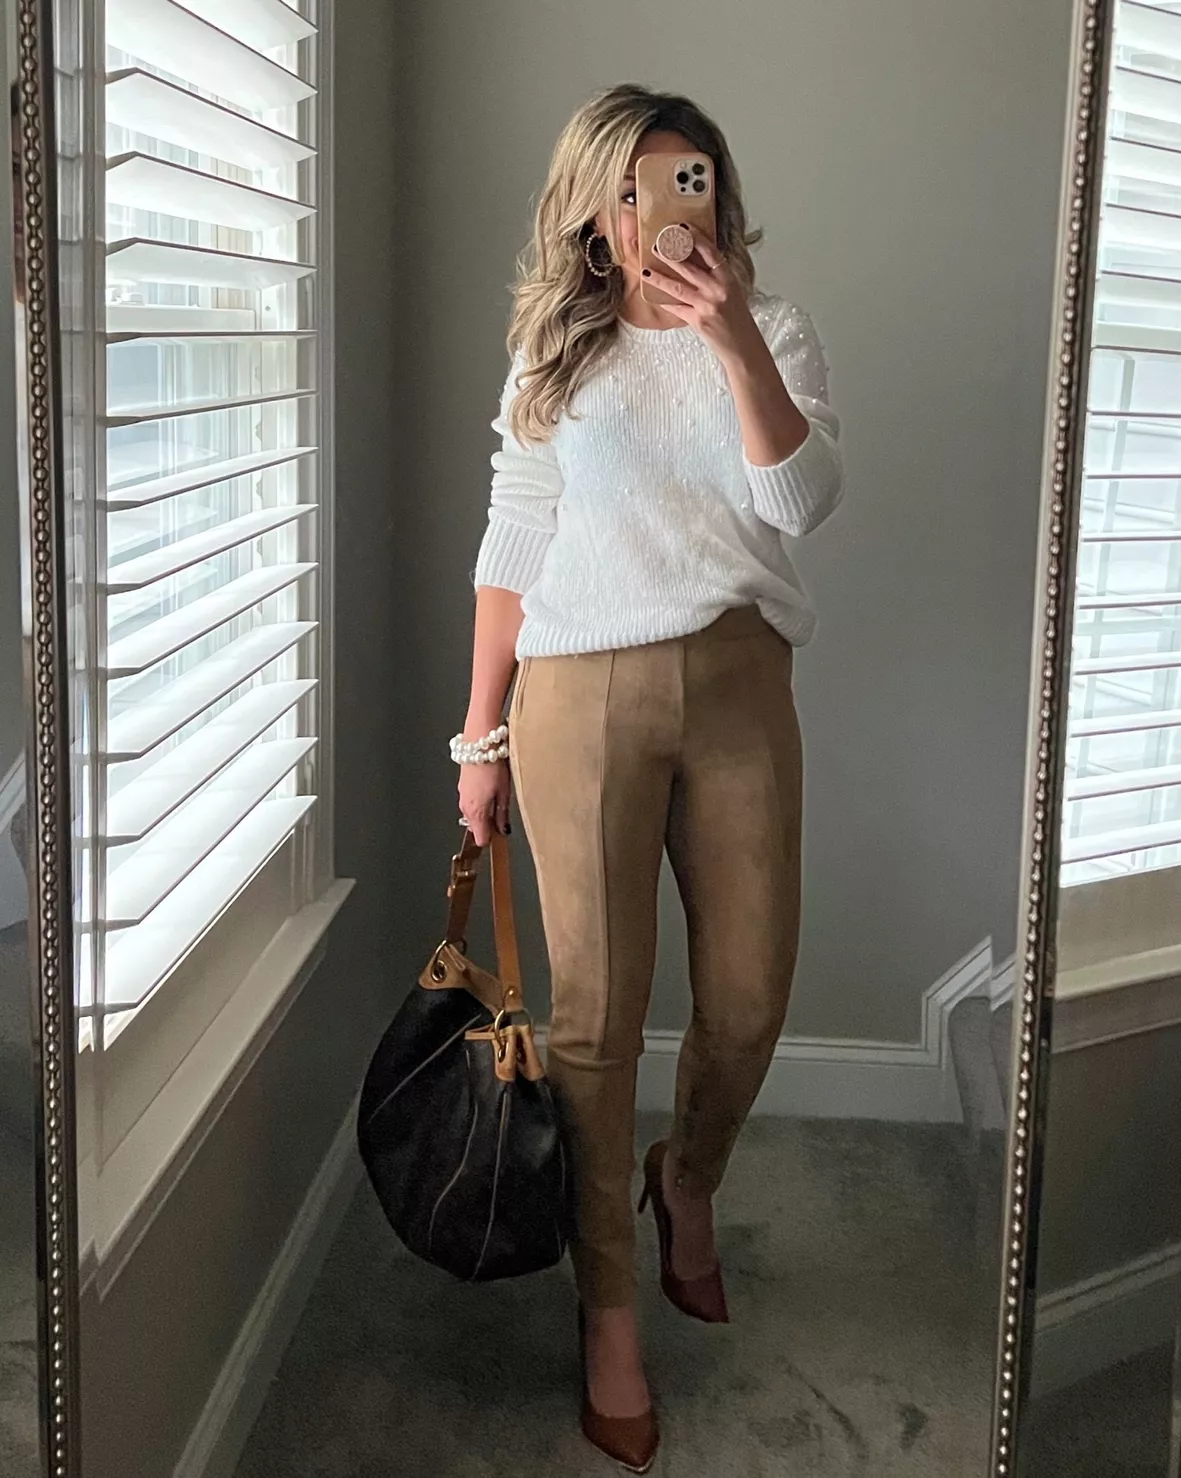 The Suede Leggings You Need This Fall  Outfits with leggings, Chic outfits,  Suede leggings